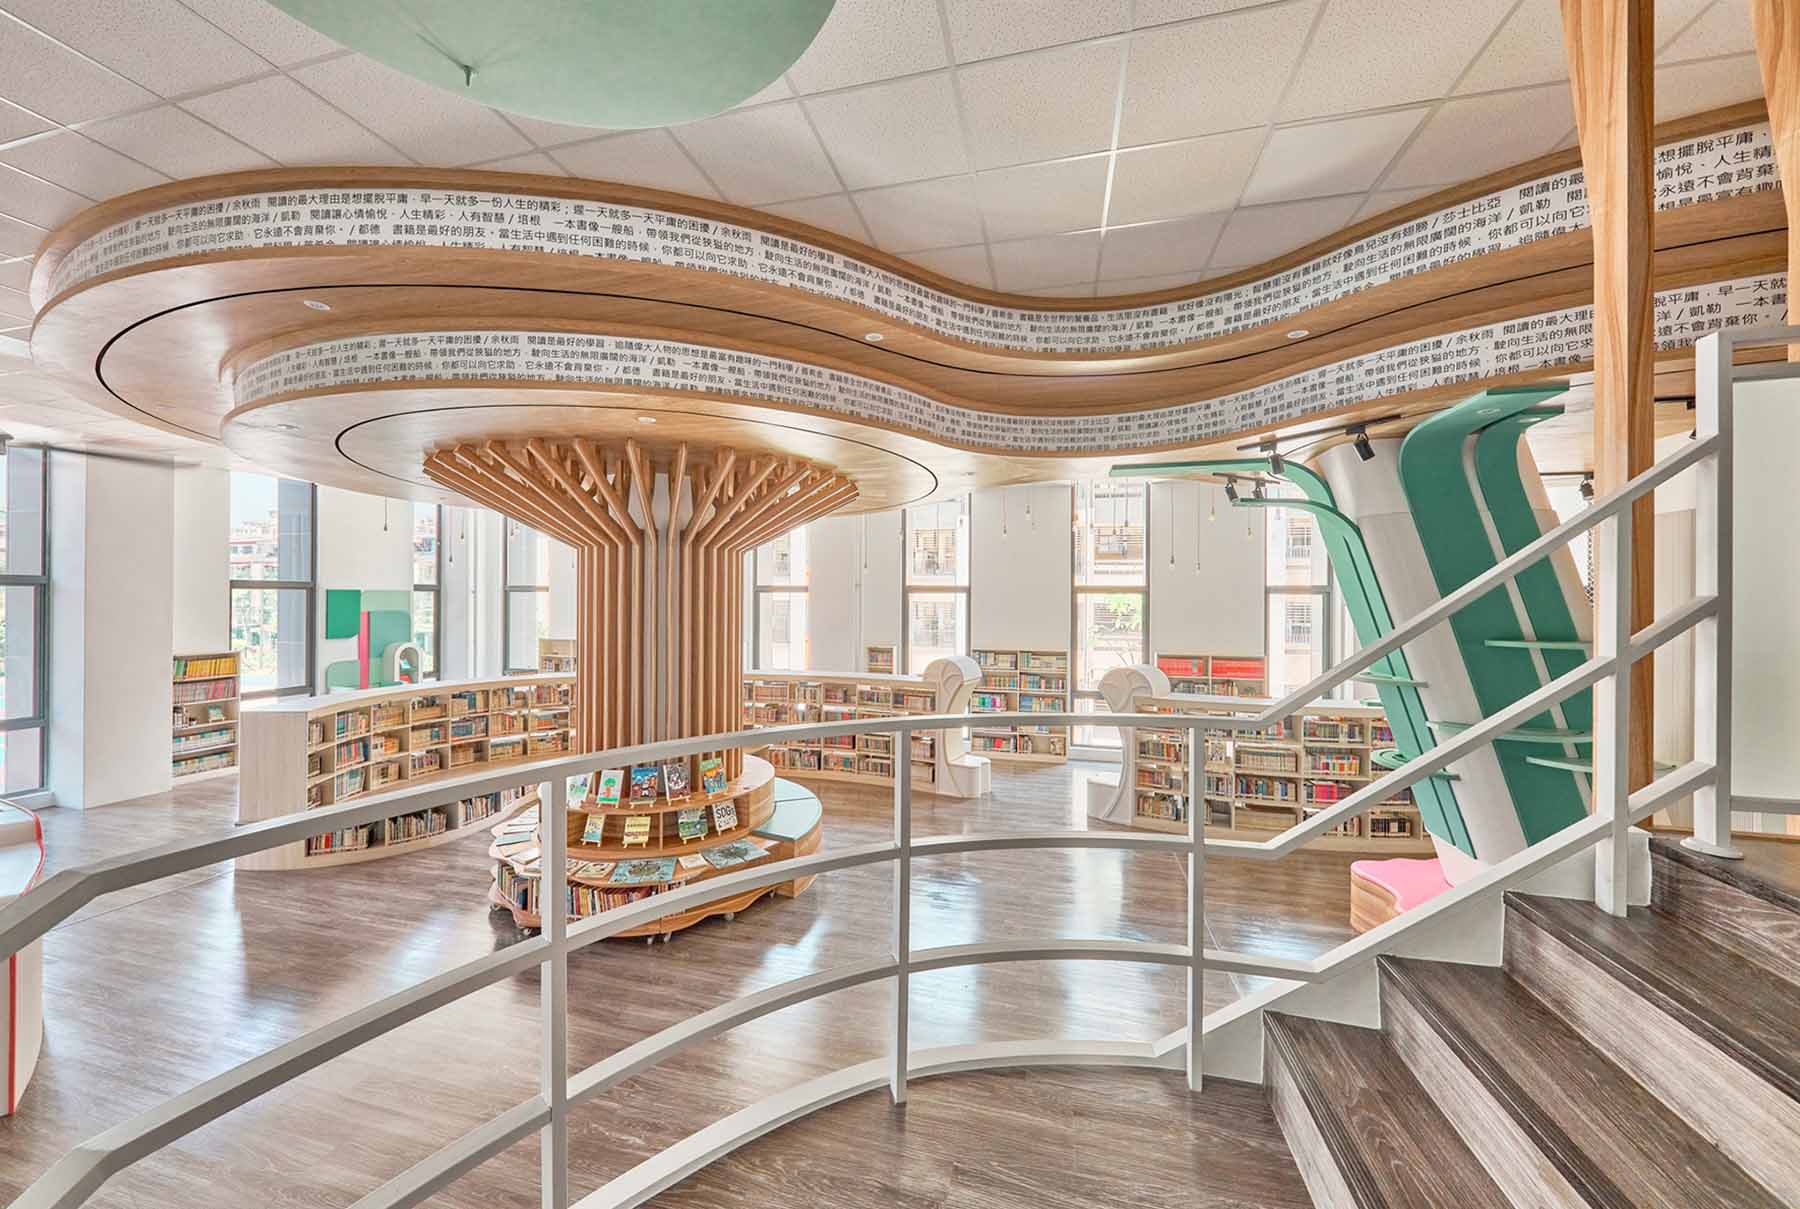 Dream Forest Elementary School Library by Hsiang Chen Lu